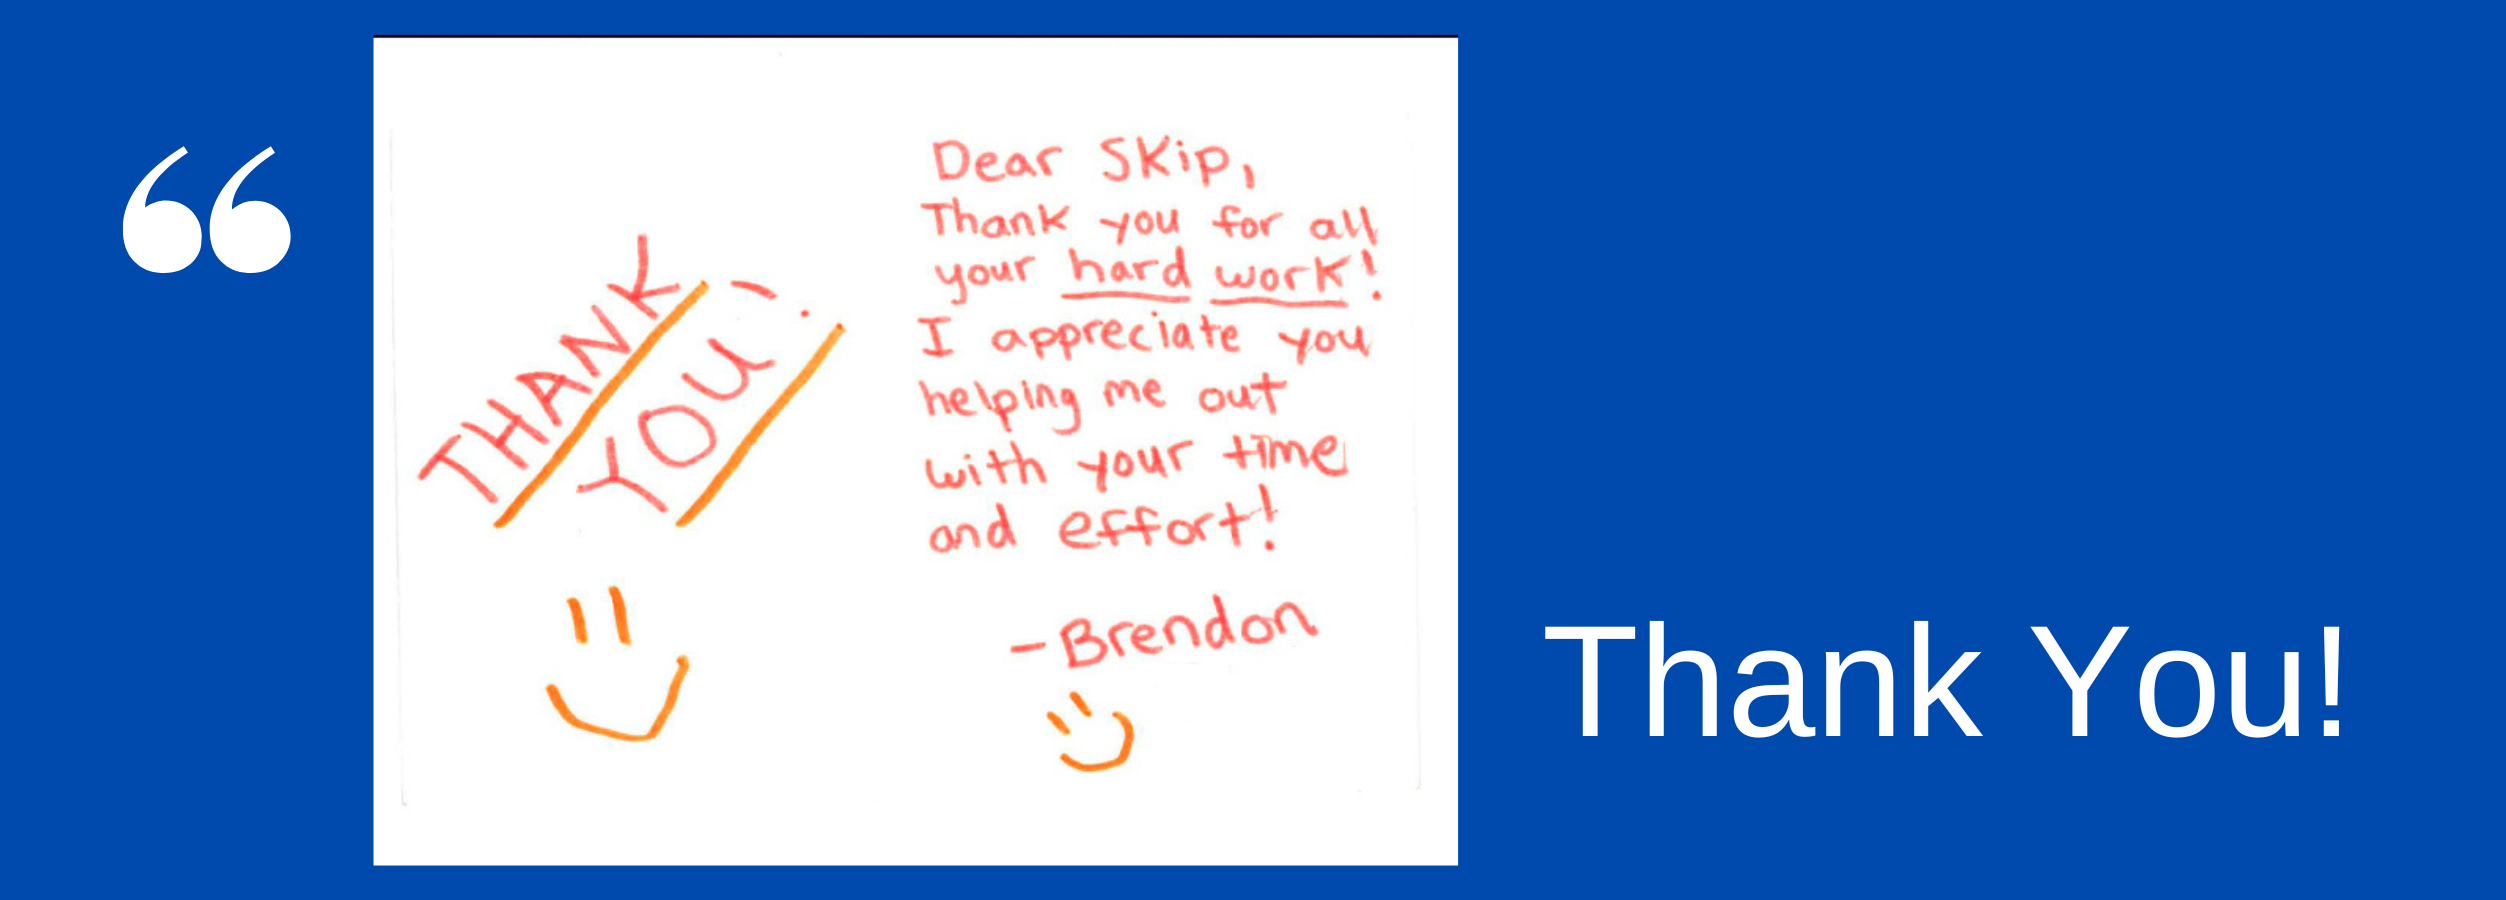 Client Thank You Note - Dear Skip, thank you for all your hard work! I appreciate you helping me out with your time and effort! Thank you, Brendon